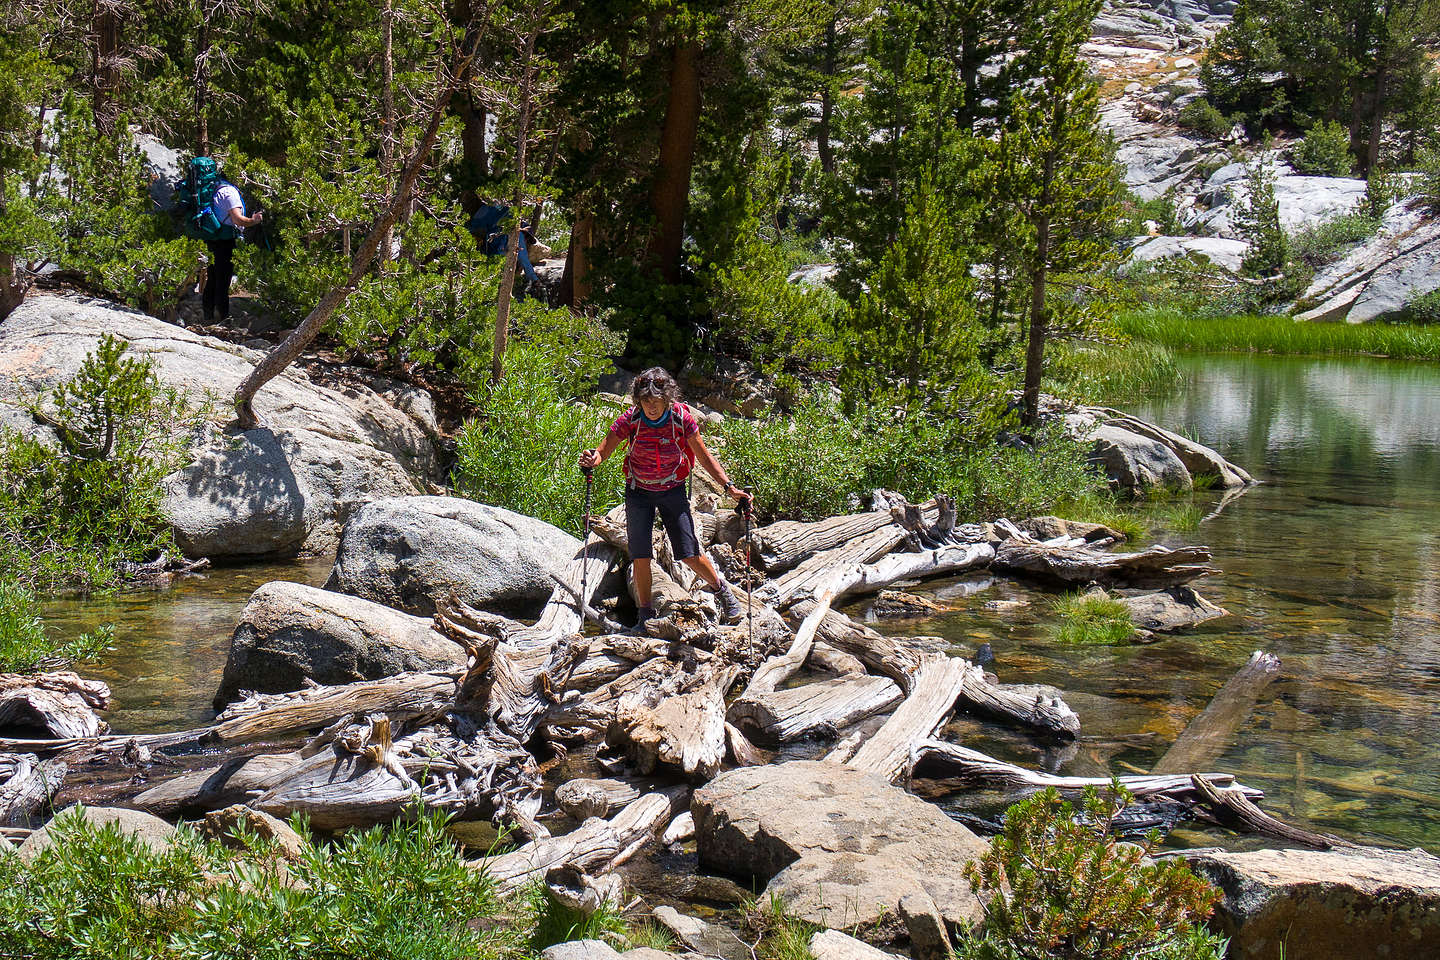 Lolo crossing the Blue Lake outlet stream